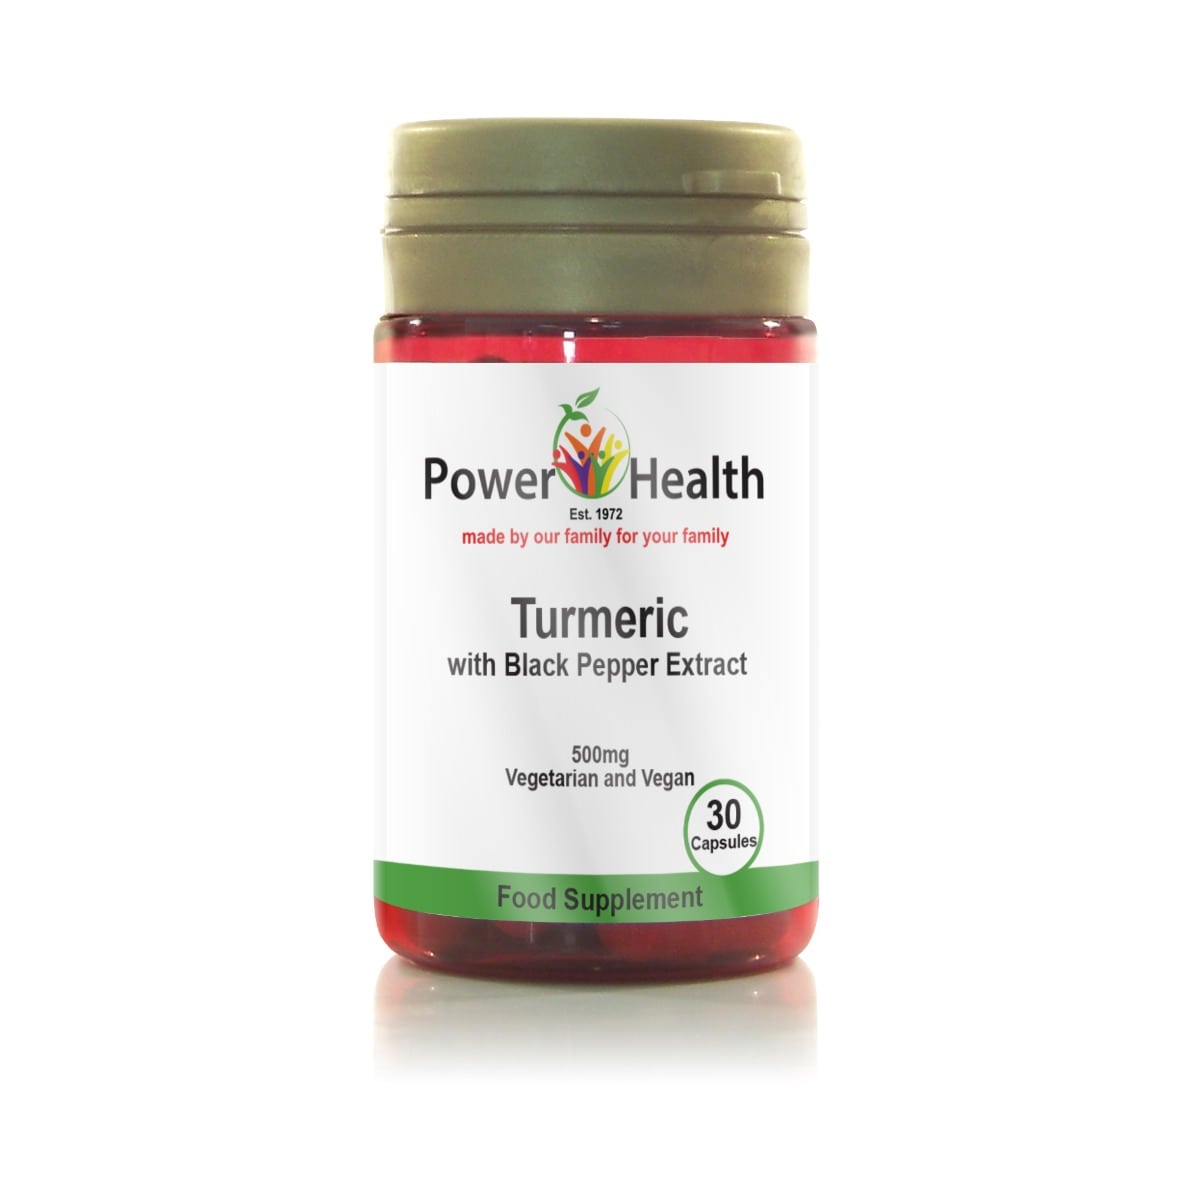 POWER HEALTH TURMERIC WITH BLACK PEPPER EXTRACT, 90 CAPSULES